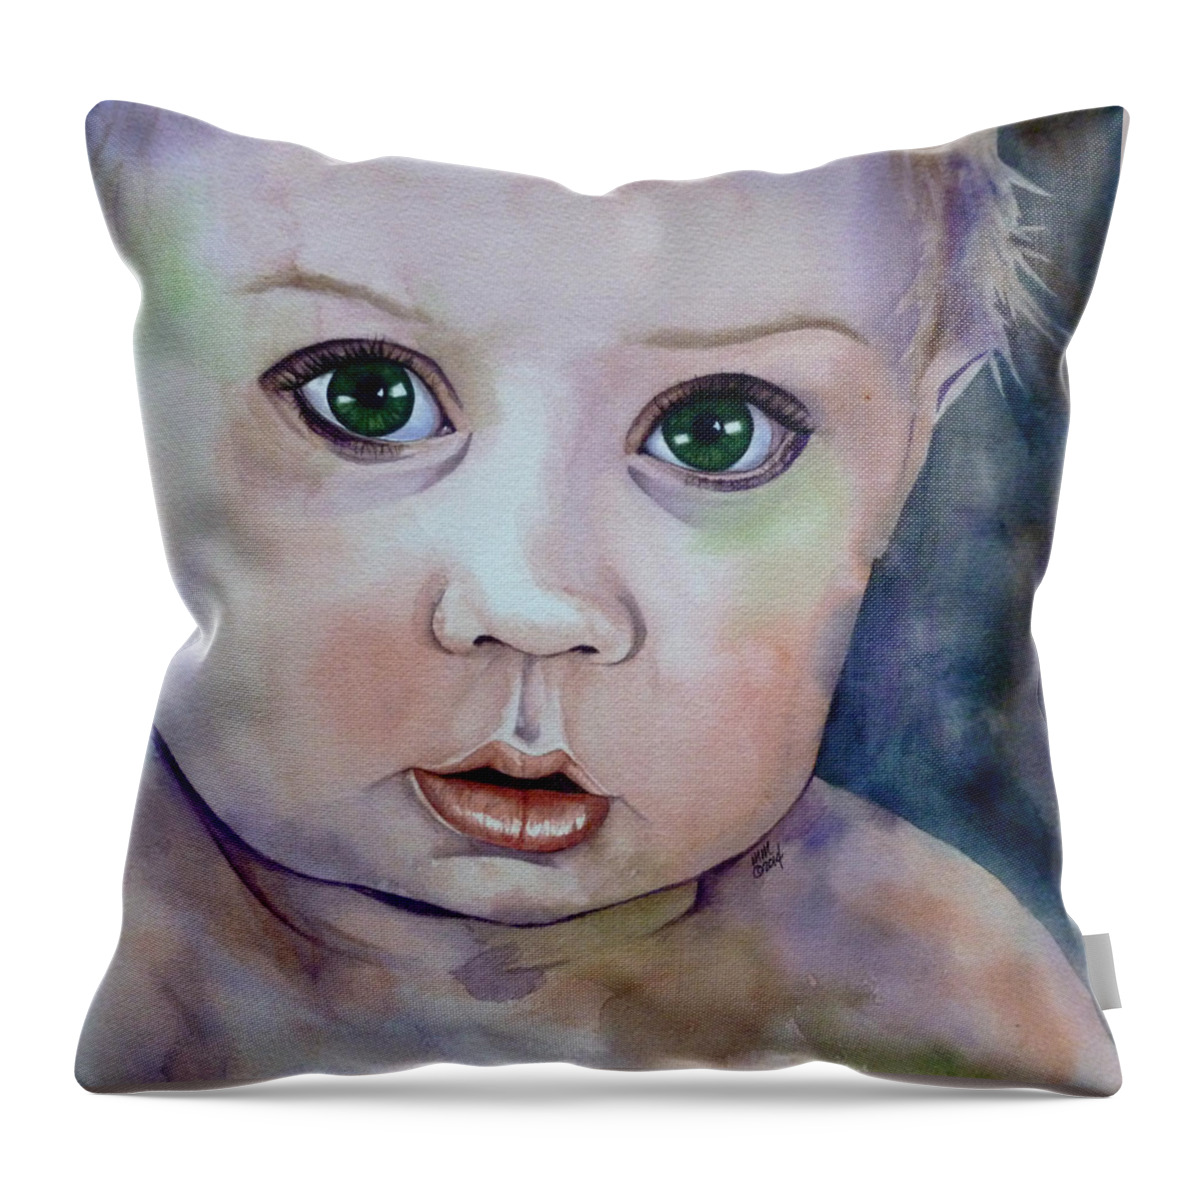 Child Throw Pillow featuring the painting Innocent by Michal Madison